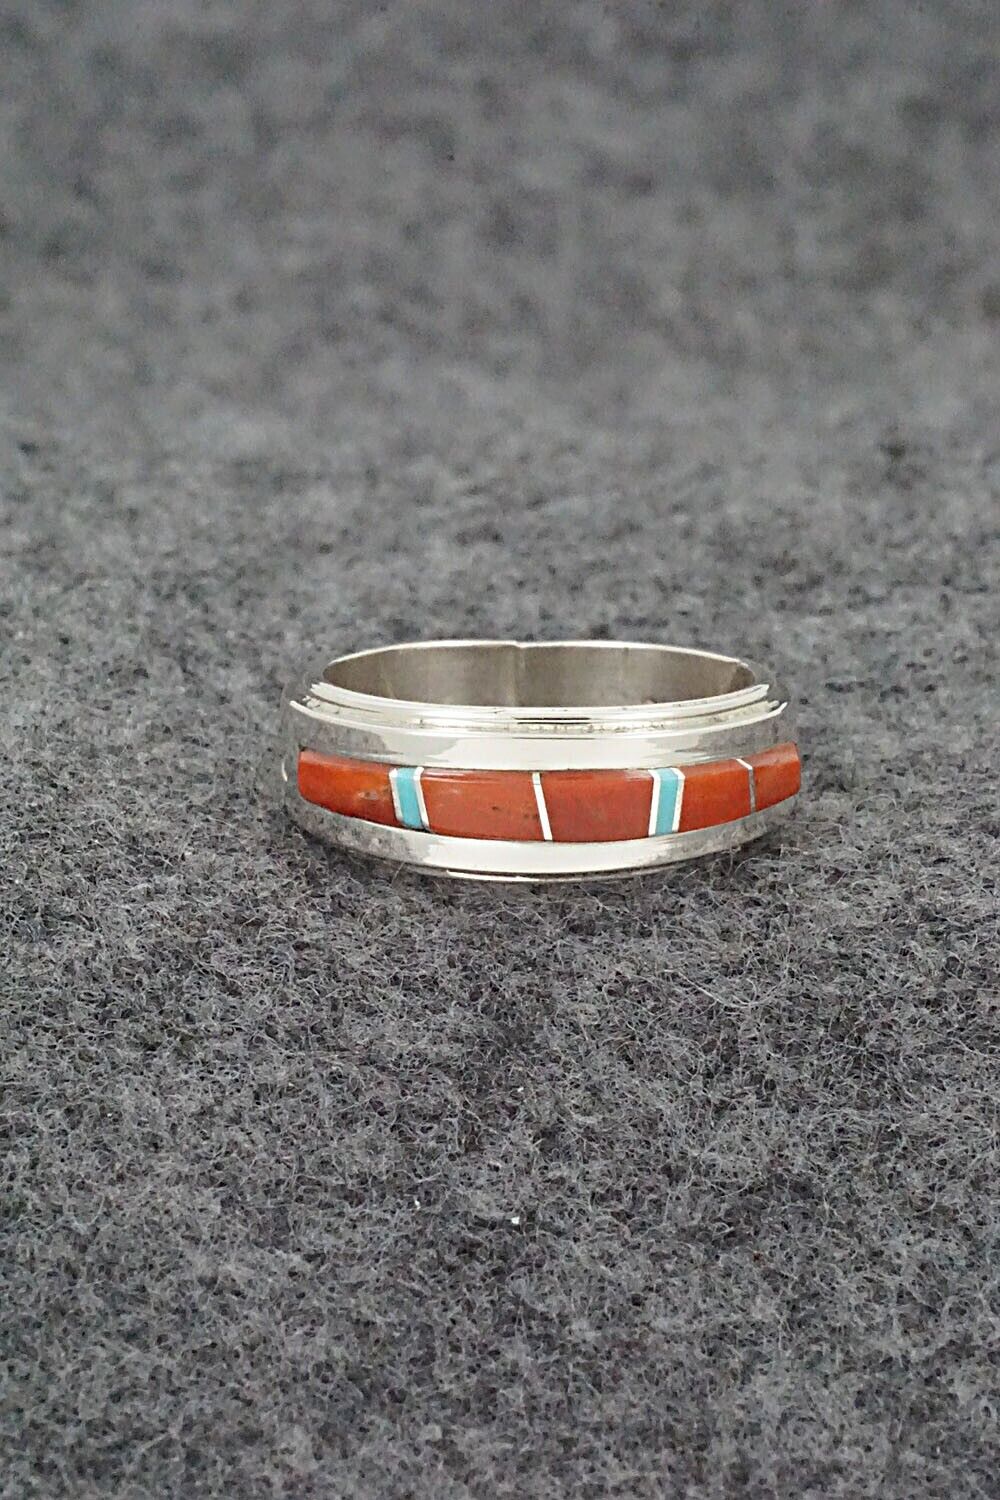 Coral, Turquoise & Sterling Silver Inlay Ring - Wilbert Muskett Jr. - Size 7